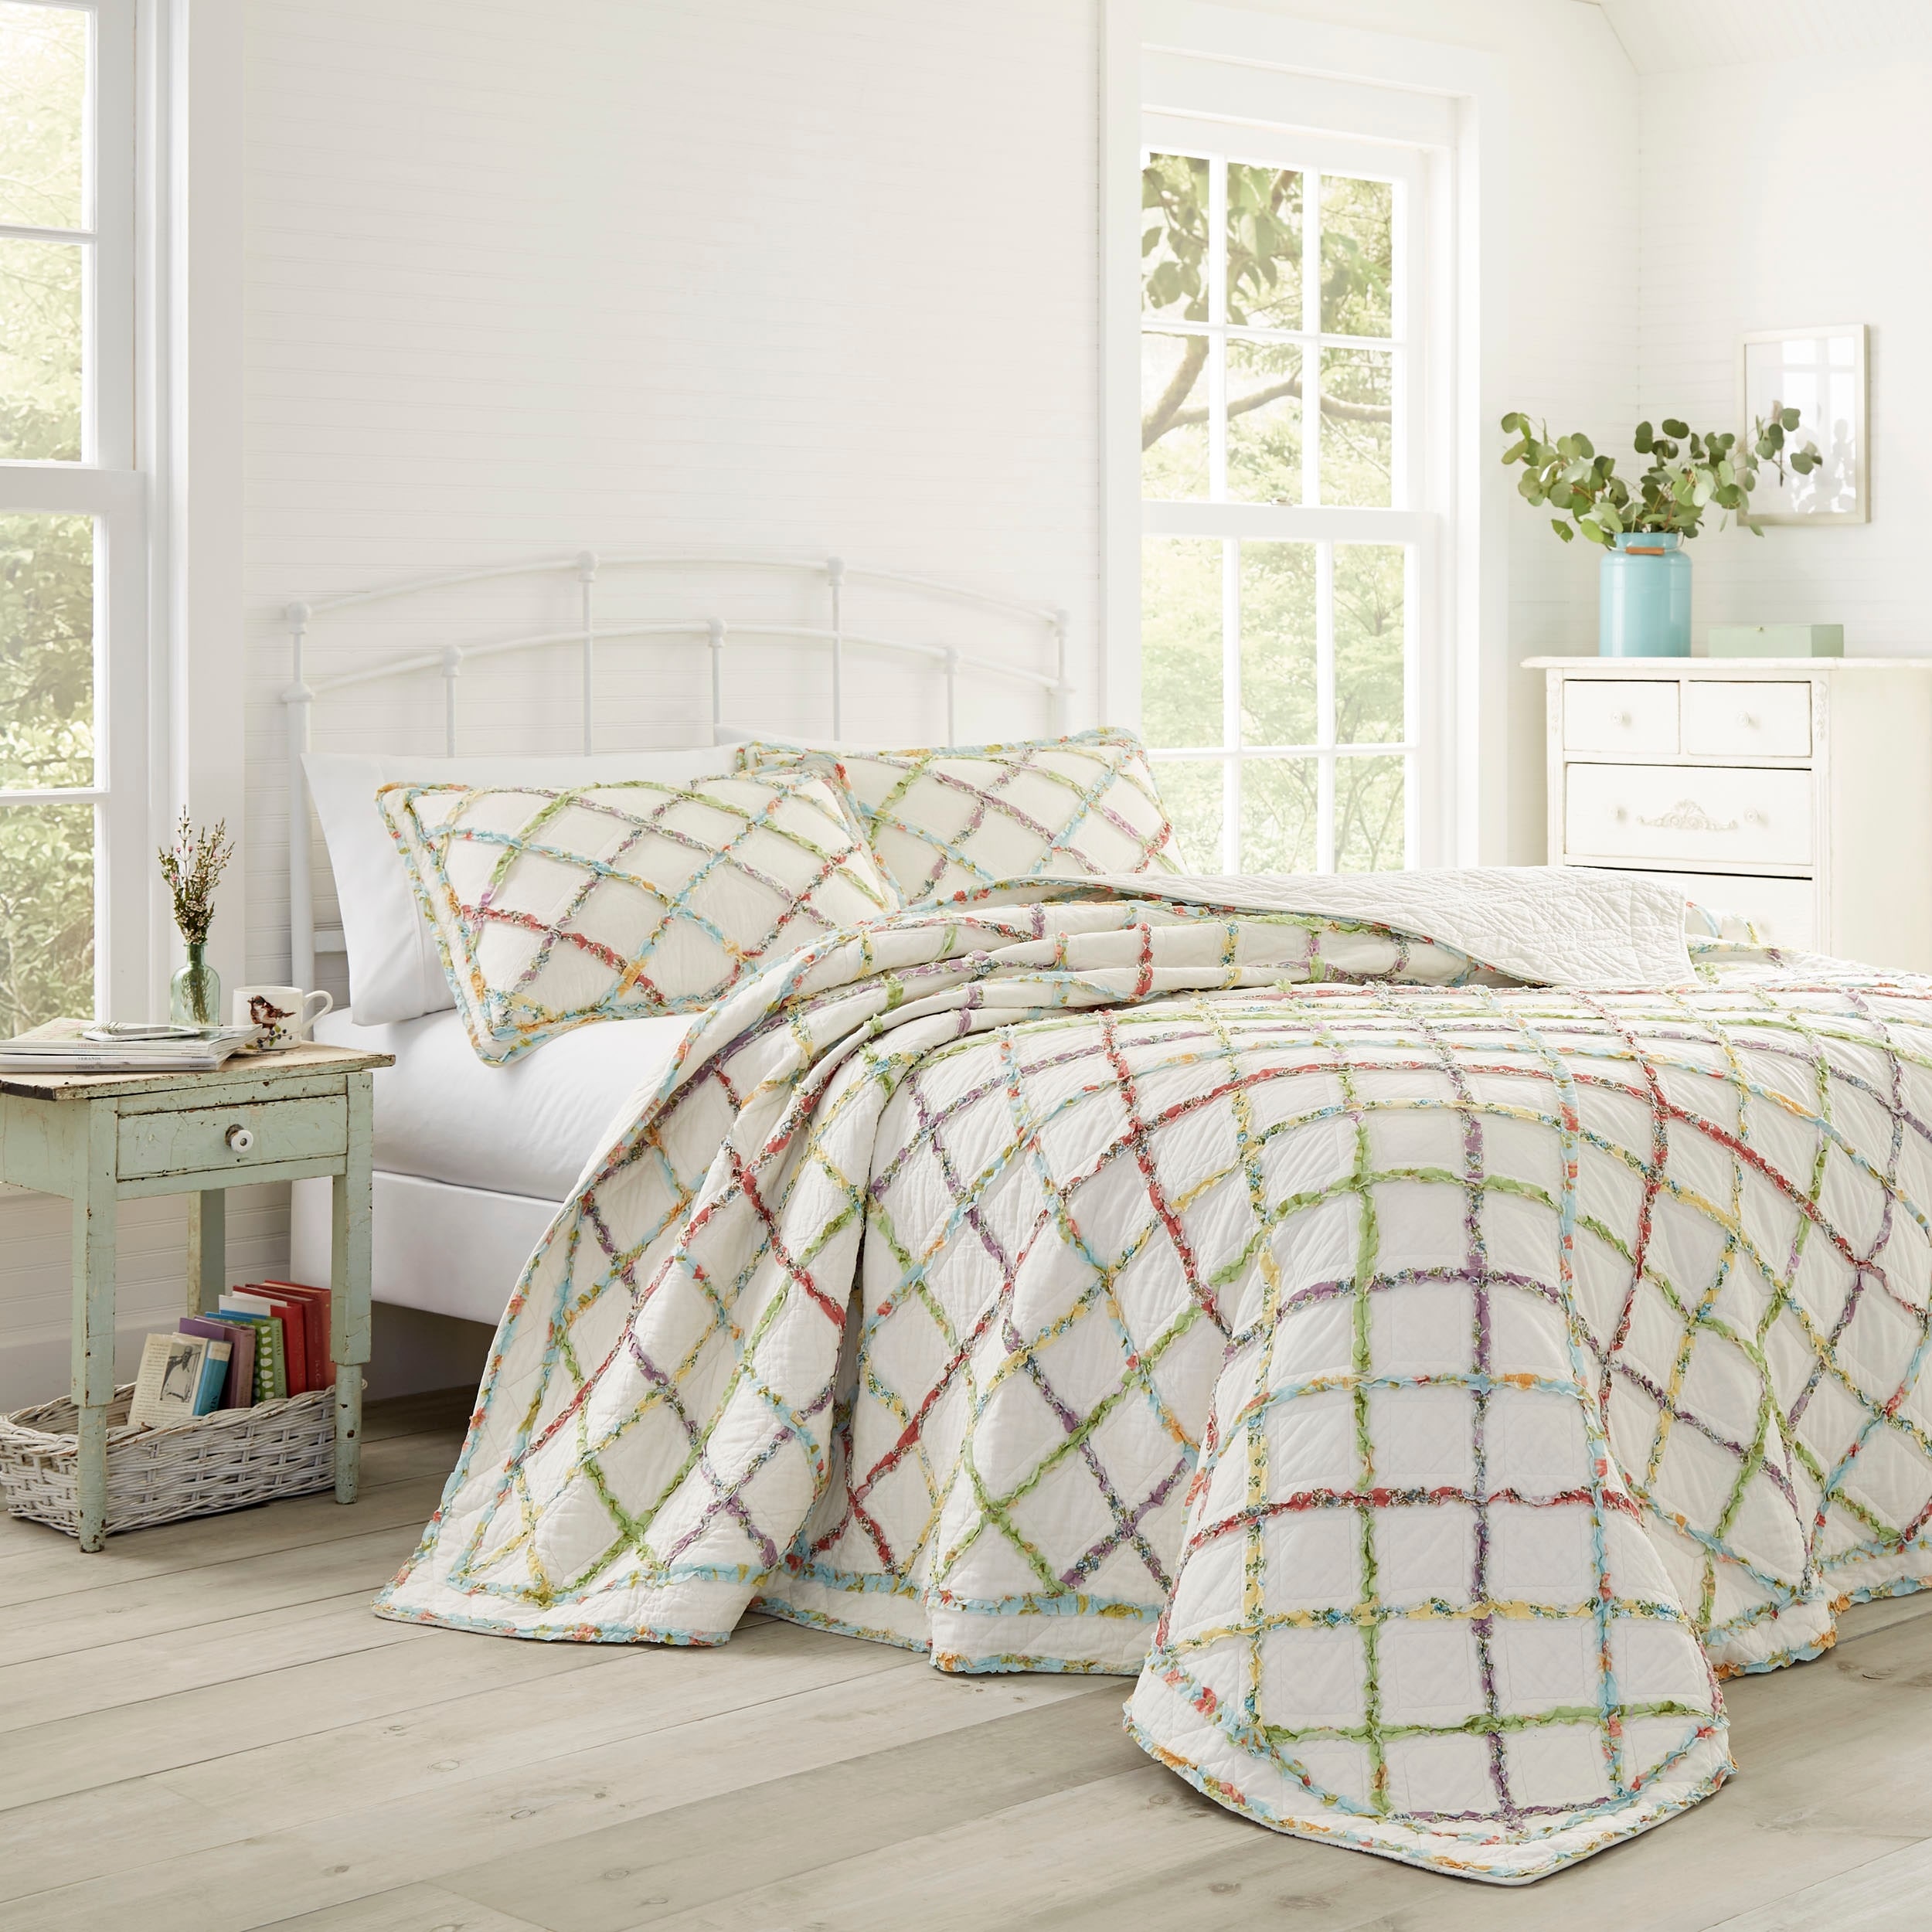 Cotton Laura Ashley Quilts and Bedspreads - Bed Bath & Beyond